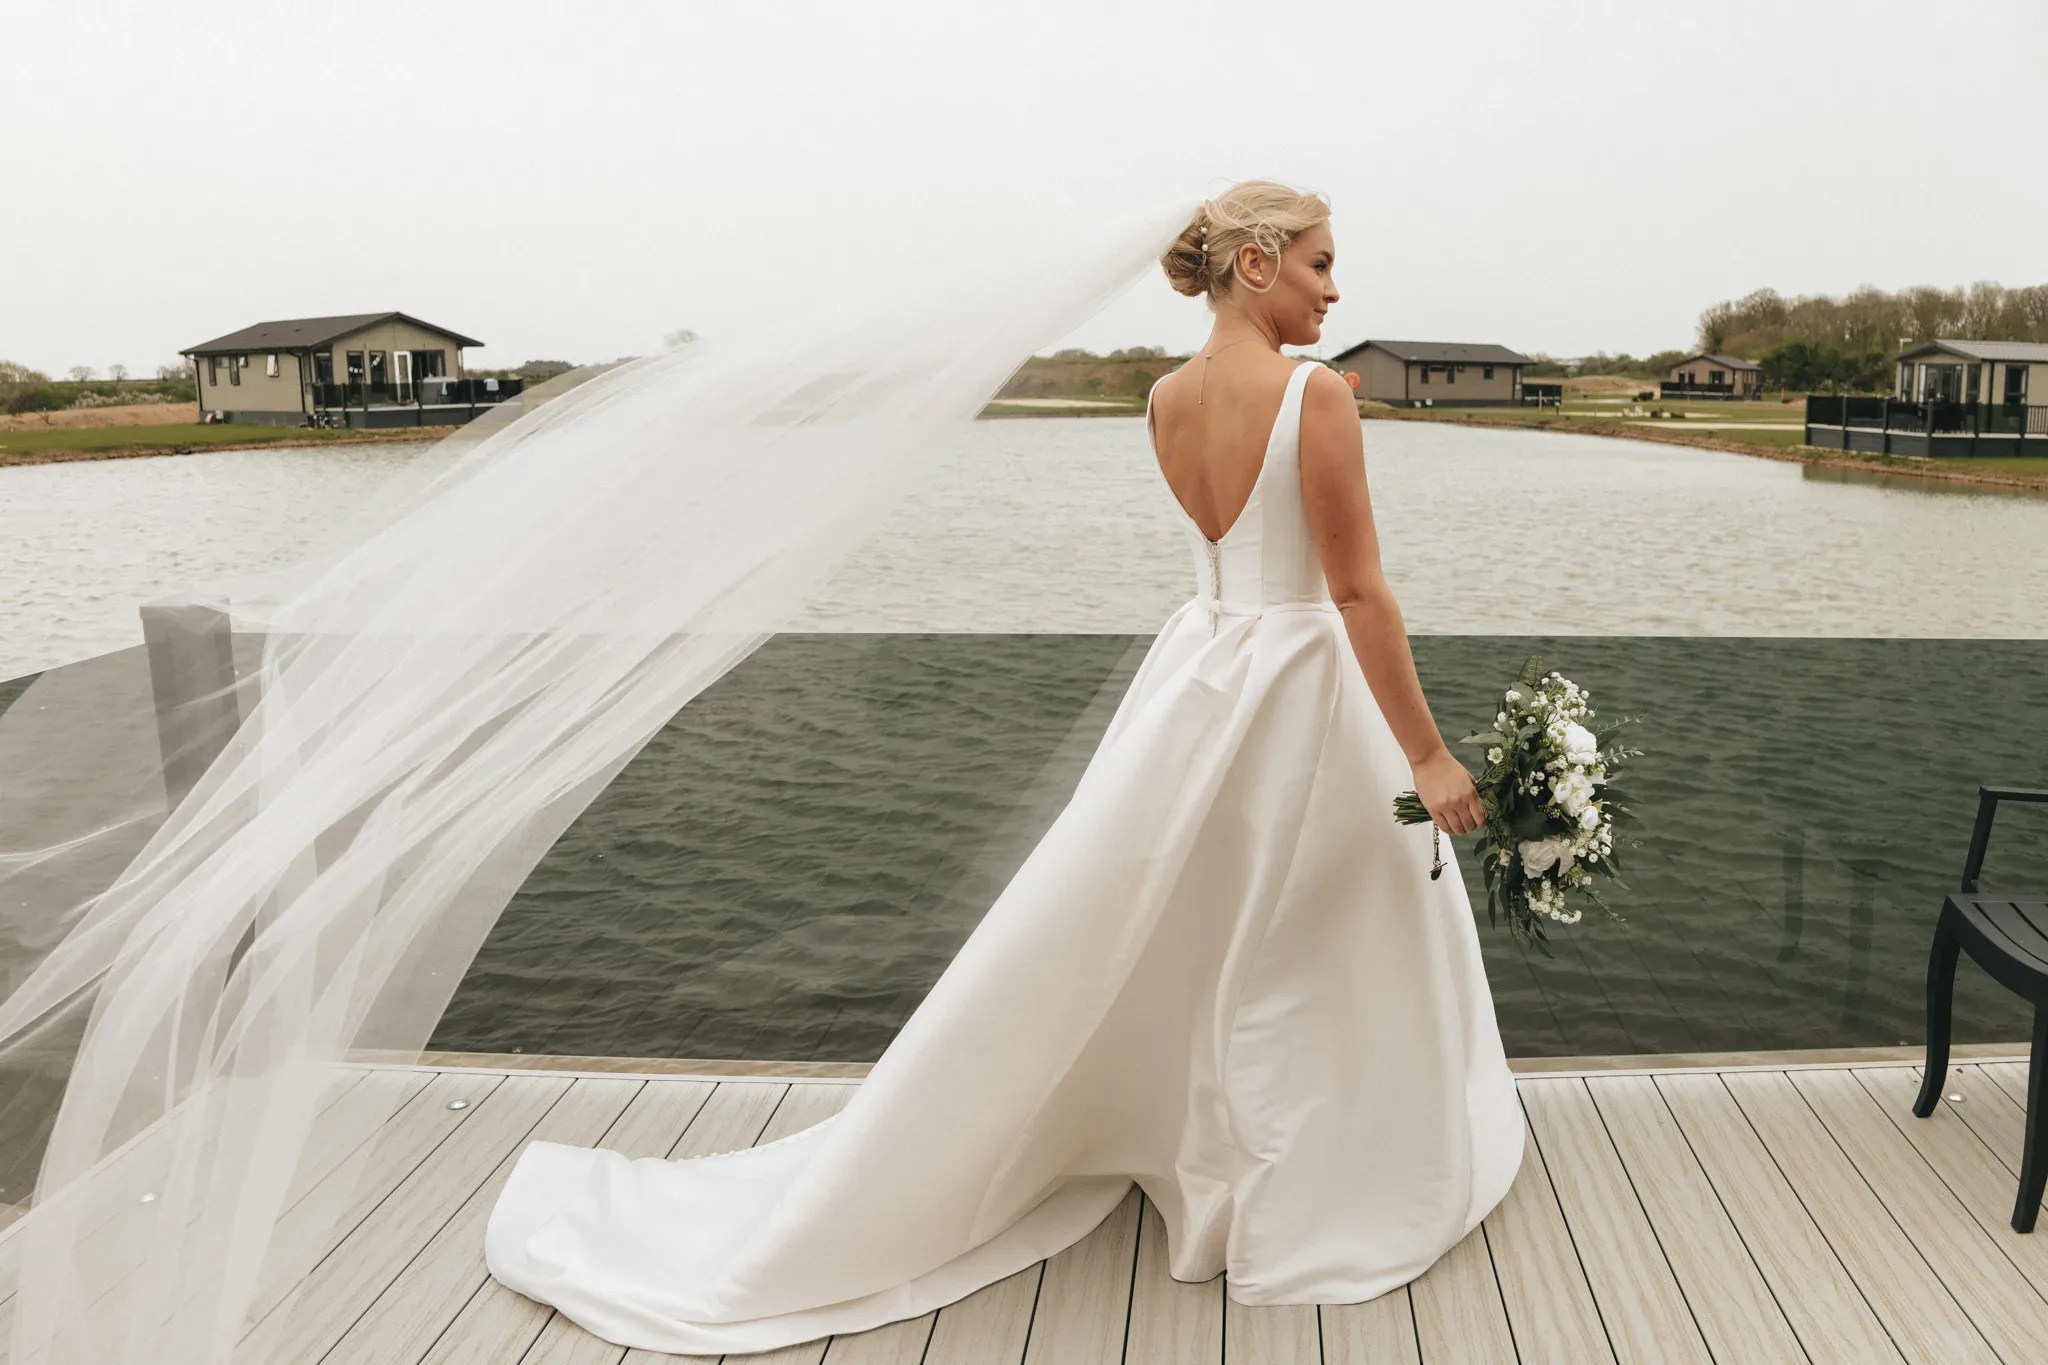 A bride in a white dress with a flowing veil stands on a lakeside deck, holding a bouquet. her back is to the camera, showcasing the elegant design of her dress against a serene lake and cloudy sky backdrop.